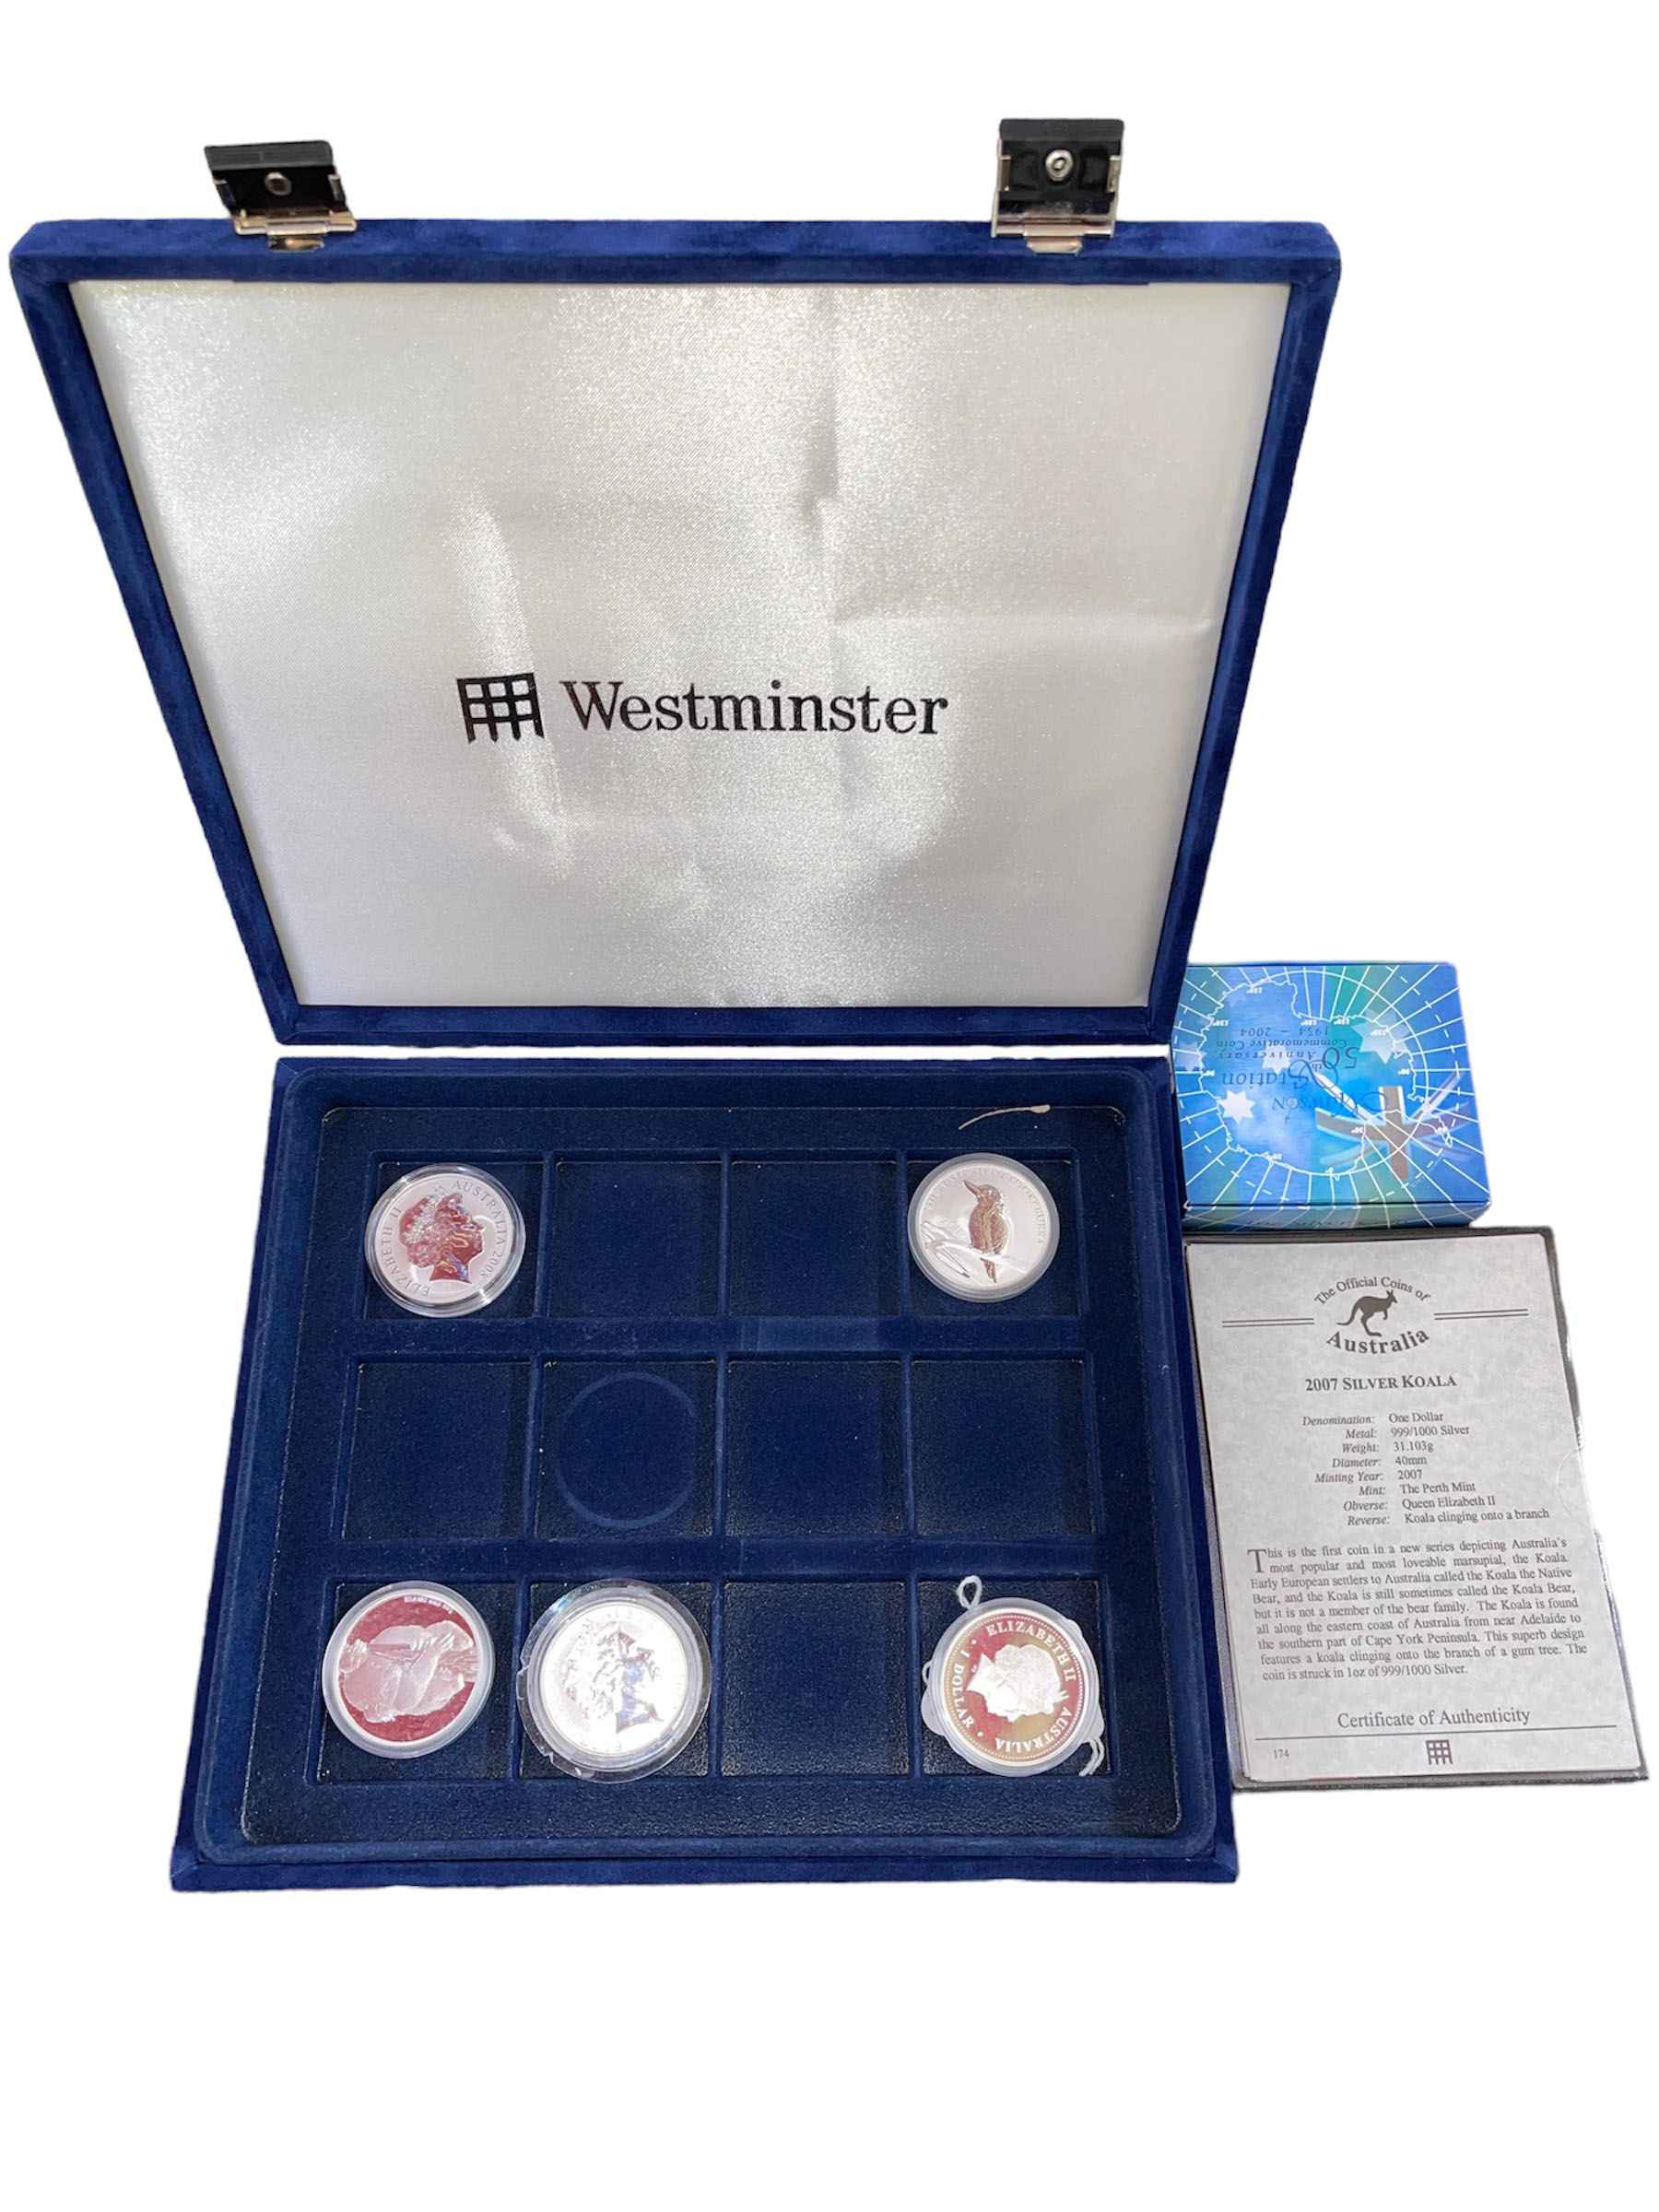 Collection of Australia silver proof coins inc 2004 and 2008 Kangaroo, 2004 Mawson Station,